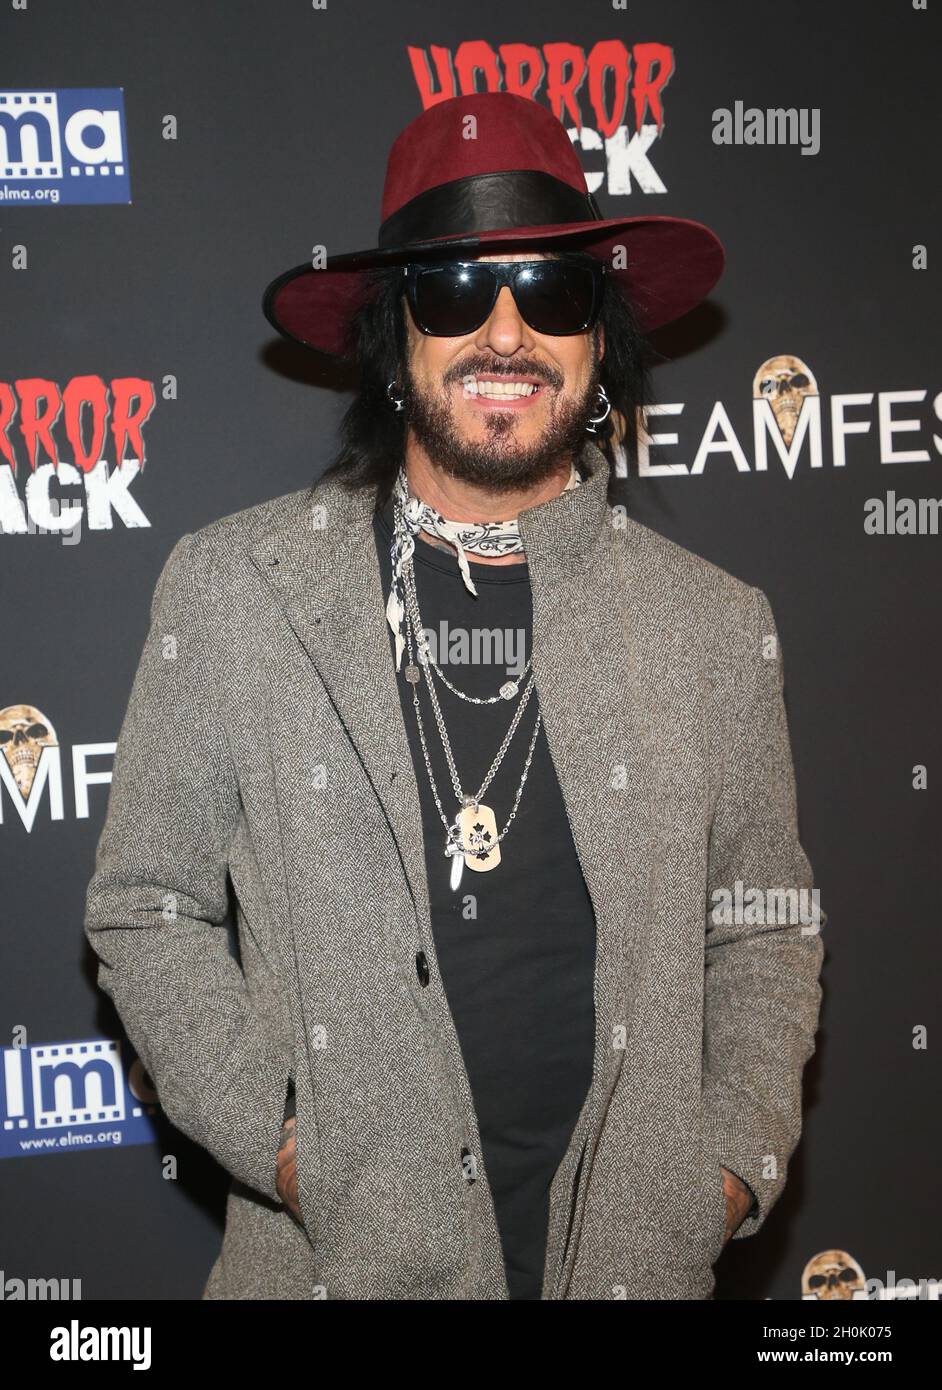 Hollywood, Ca. 12th Oct, 2021. Nikki Sixx, at the 21st Screamfest Opening Night Screening Of The Retaliators at Mann Chinese 6 Theatre in Hollywood, California on October 12, 2021. Credit: Faye Sadou/Media Punch/Alamy Live News Stock Photo